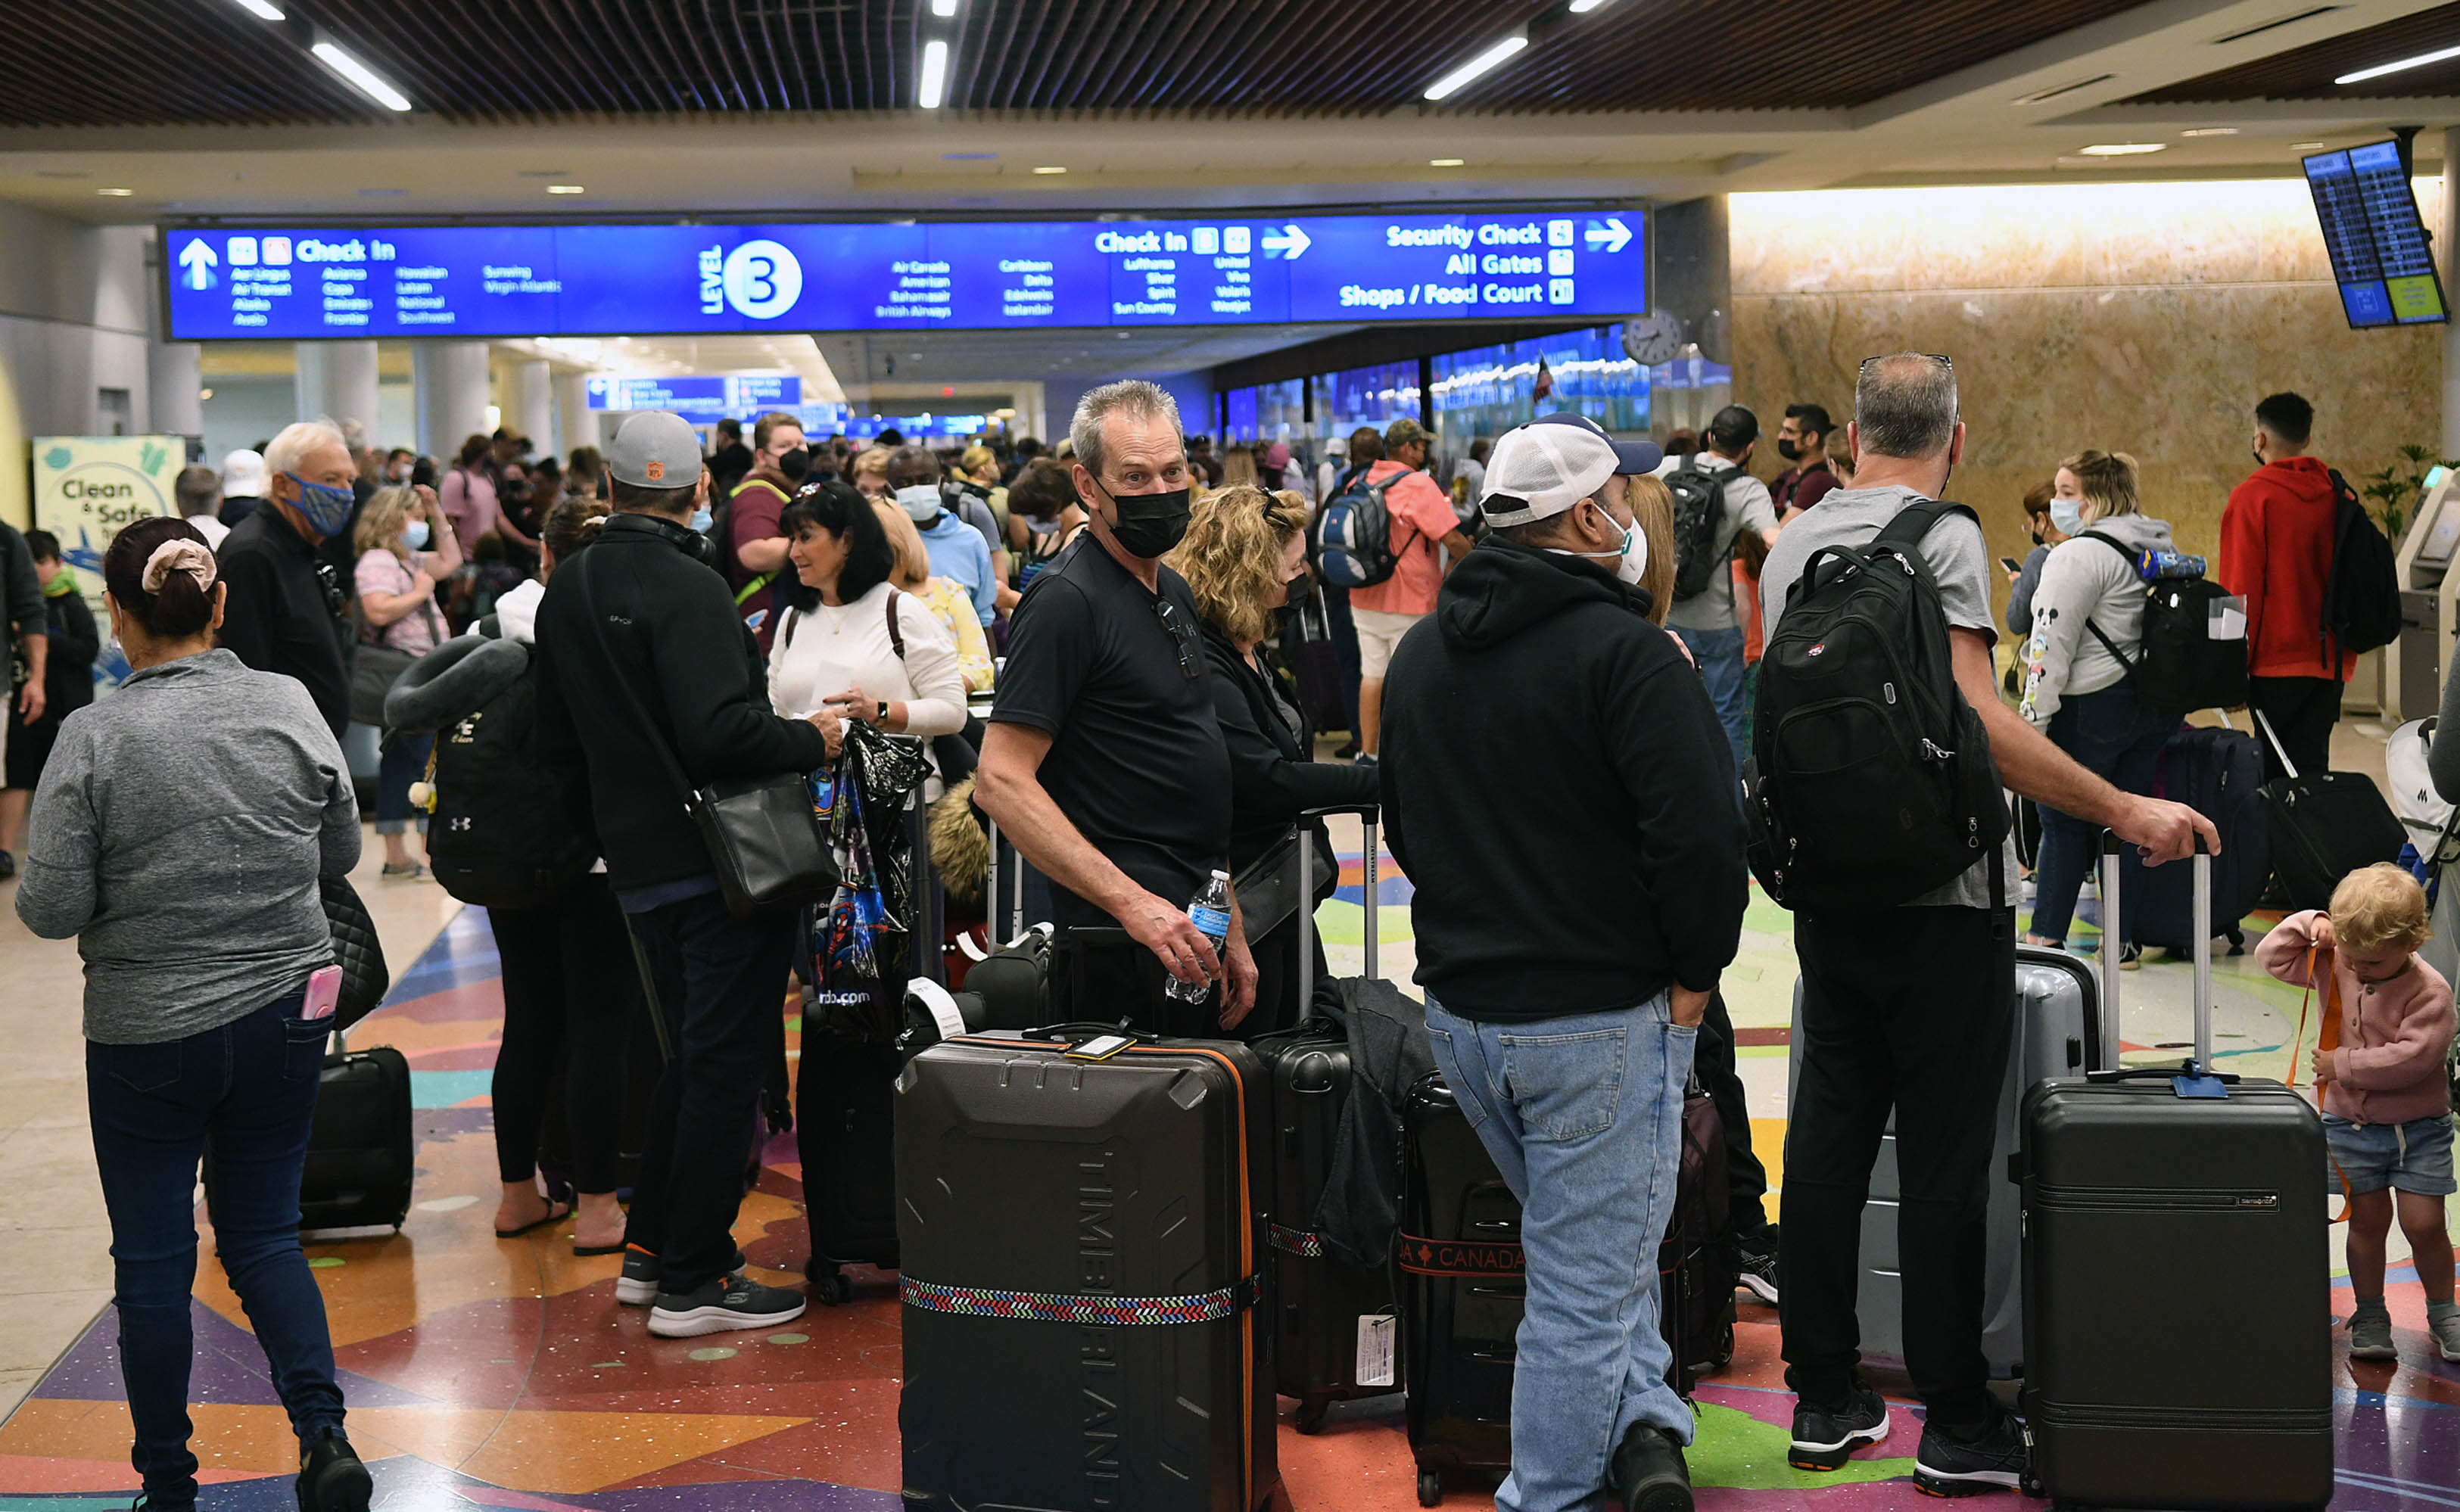 Spring break passengers wait in a TSA security line at Orlando International Airport. While COVID-19 face masks are still required, crowds have increased over last year. (Photo by Paul Hennessy/SOPA Images/LightRocket via Getty Images)